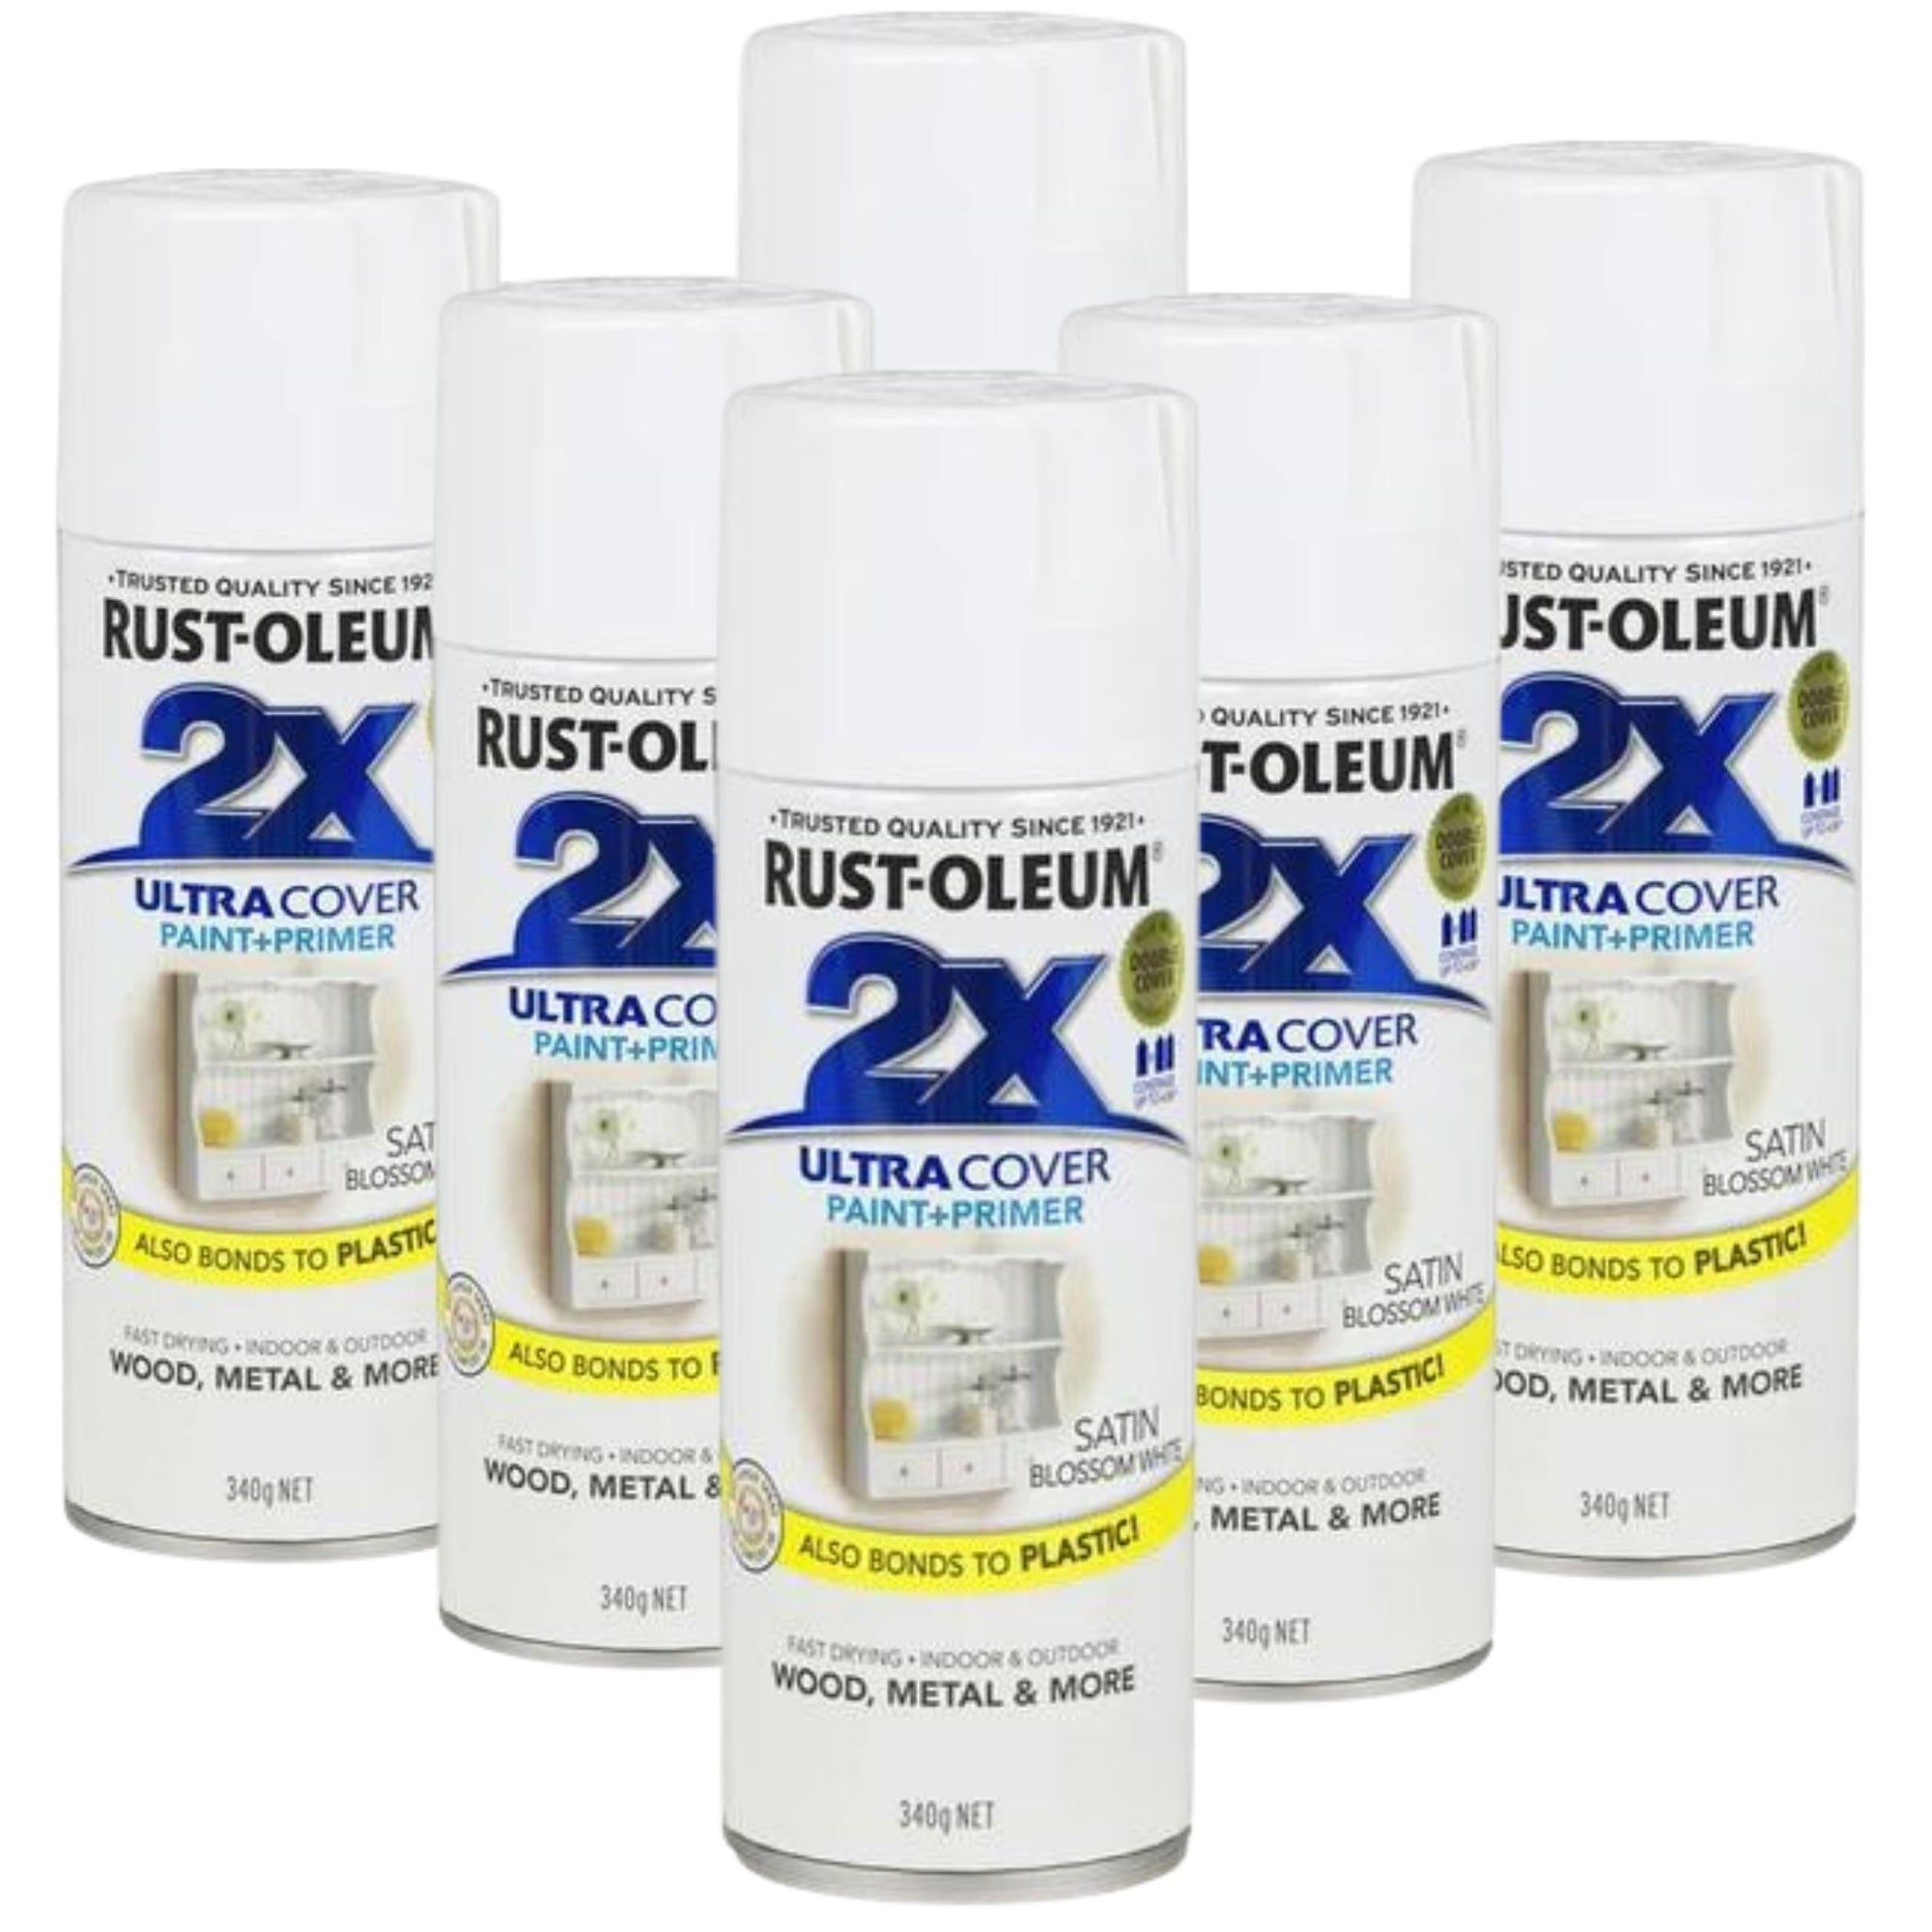 6 Cans | RUST-OLEUM 2X Gloss Paint & Primer Spray Paint 340g | 276316 Satin Blossom White - South East Clearance Centre